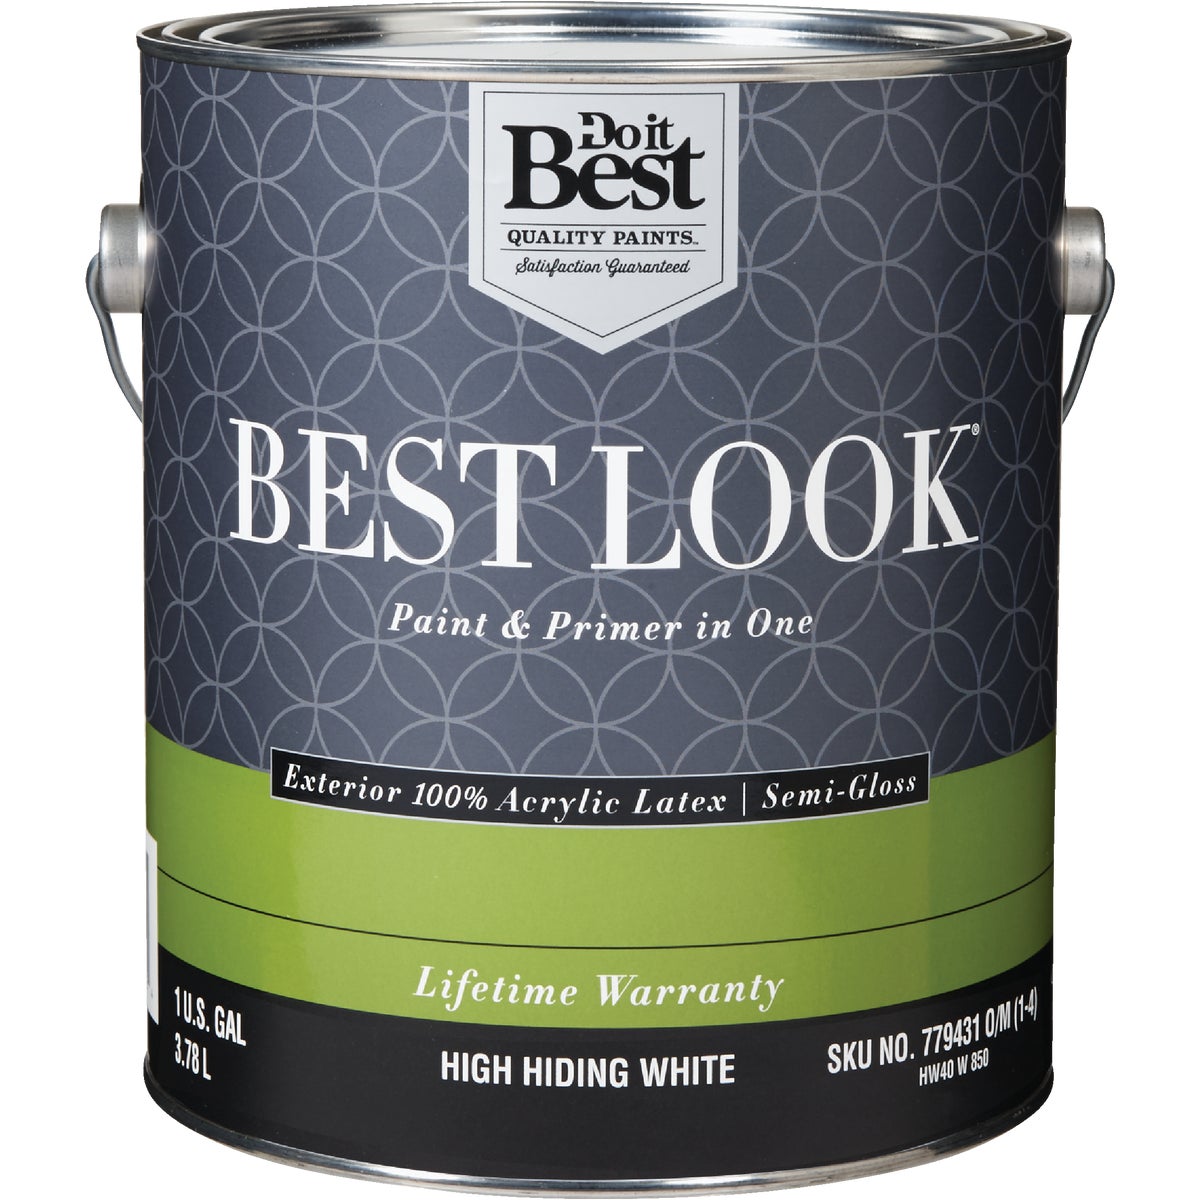 Best Look SIM Supply, Inc. HW40W0850-16 Best Look 100% Acrylic Latex Premium Paint & Primer In One Semi-Gloss Exterior House Paint, High H